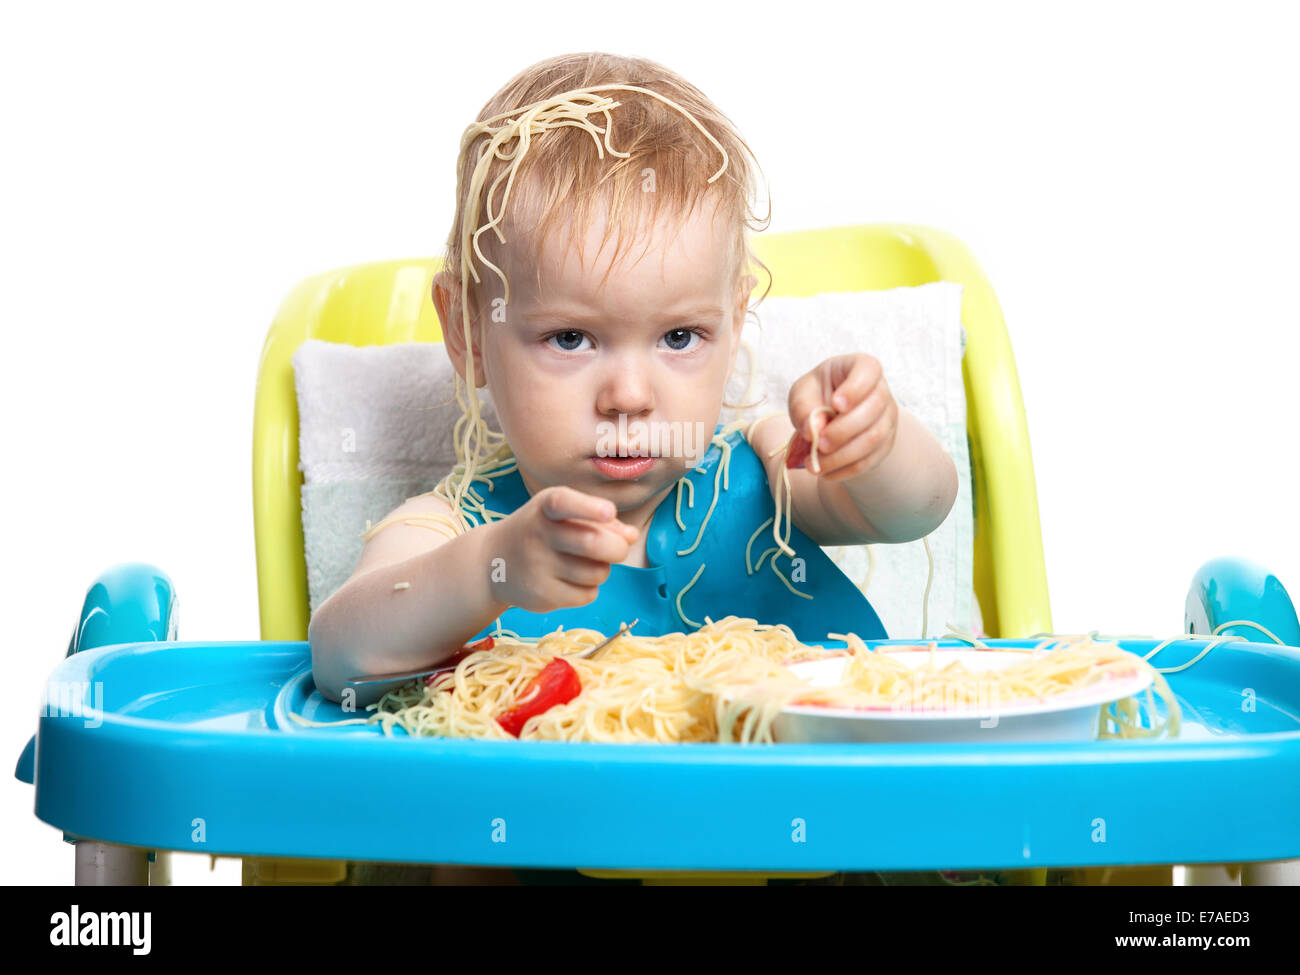 Little blond boy eating spaghetti, with pasta on his head Stock Photo